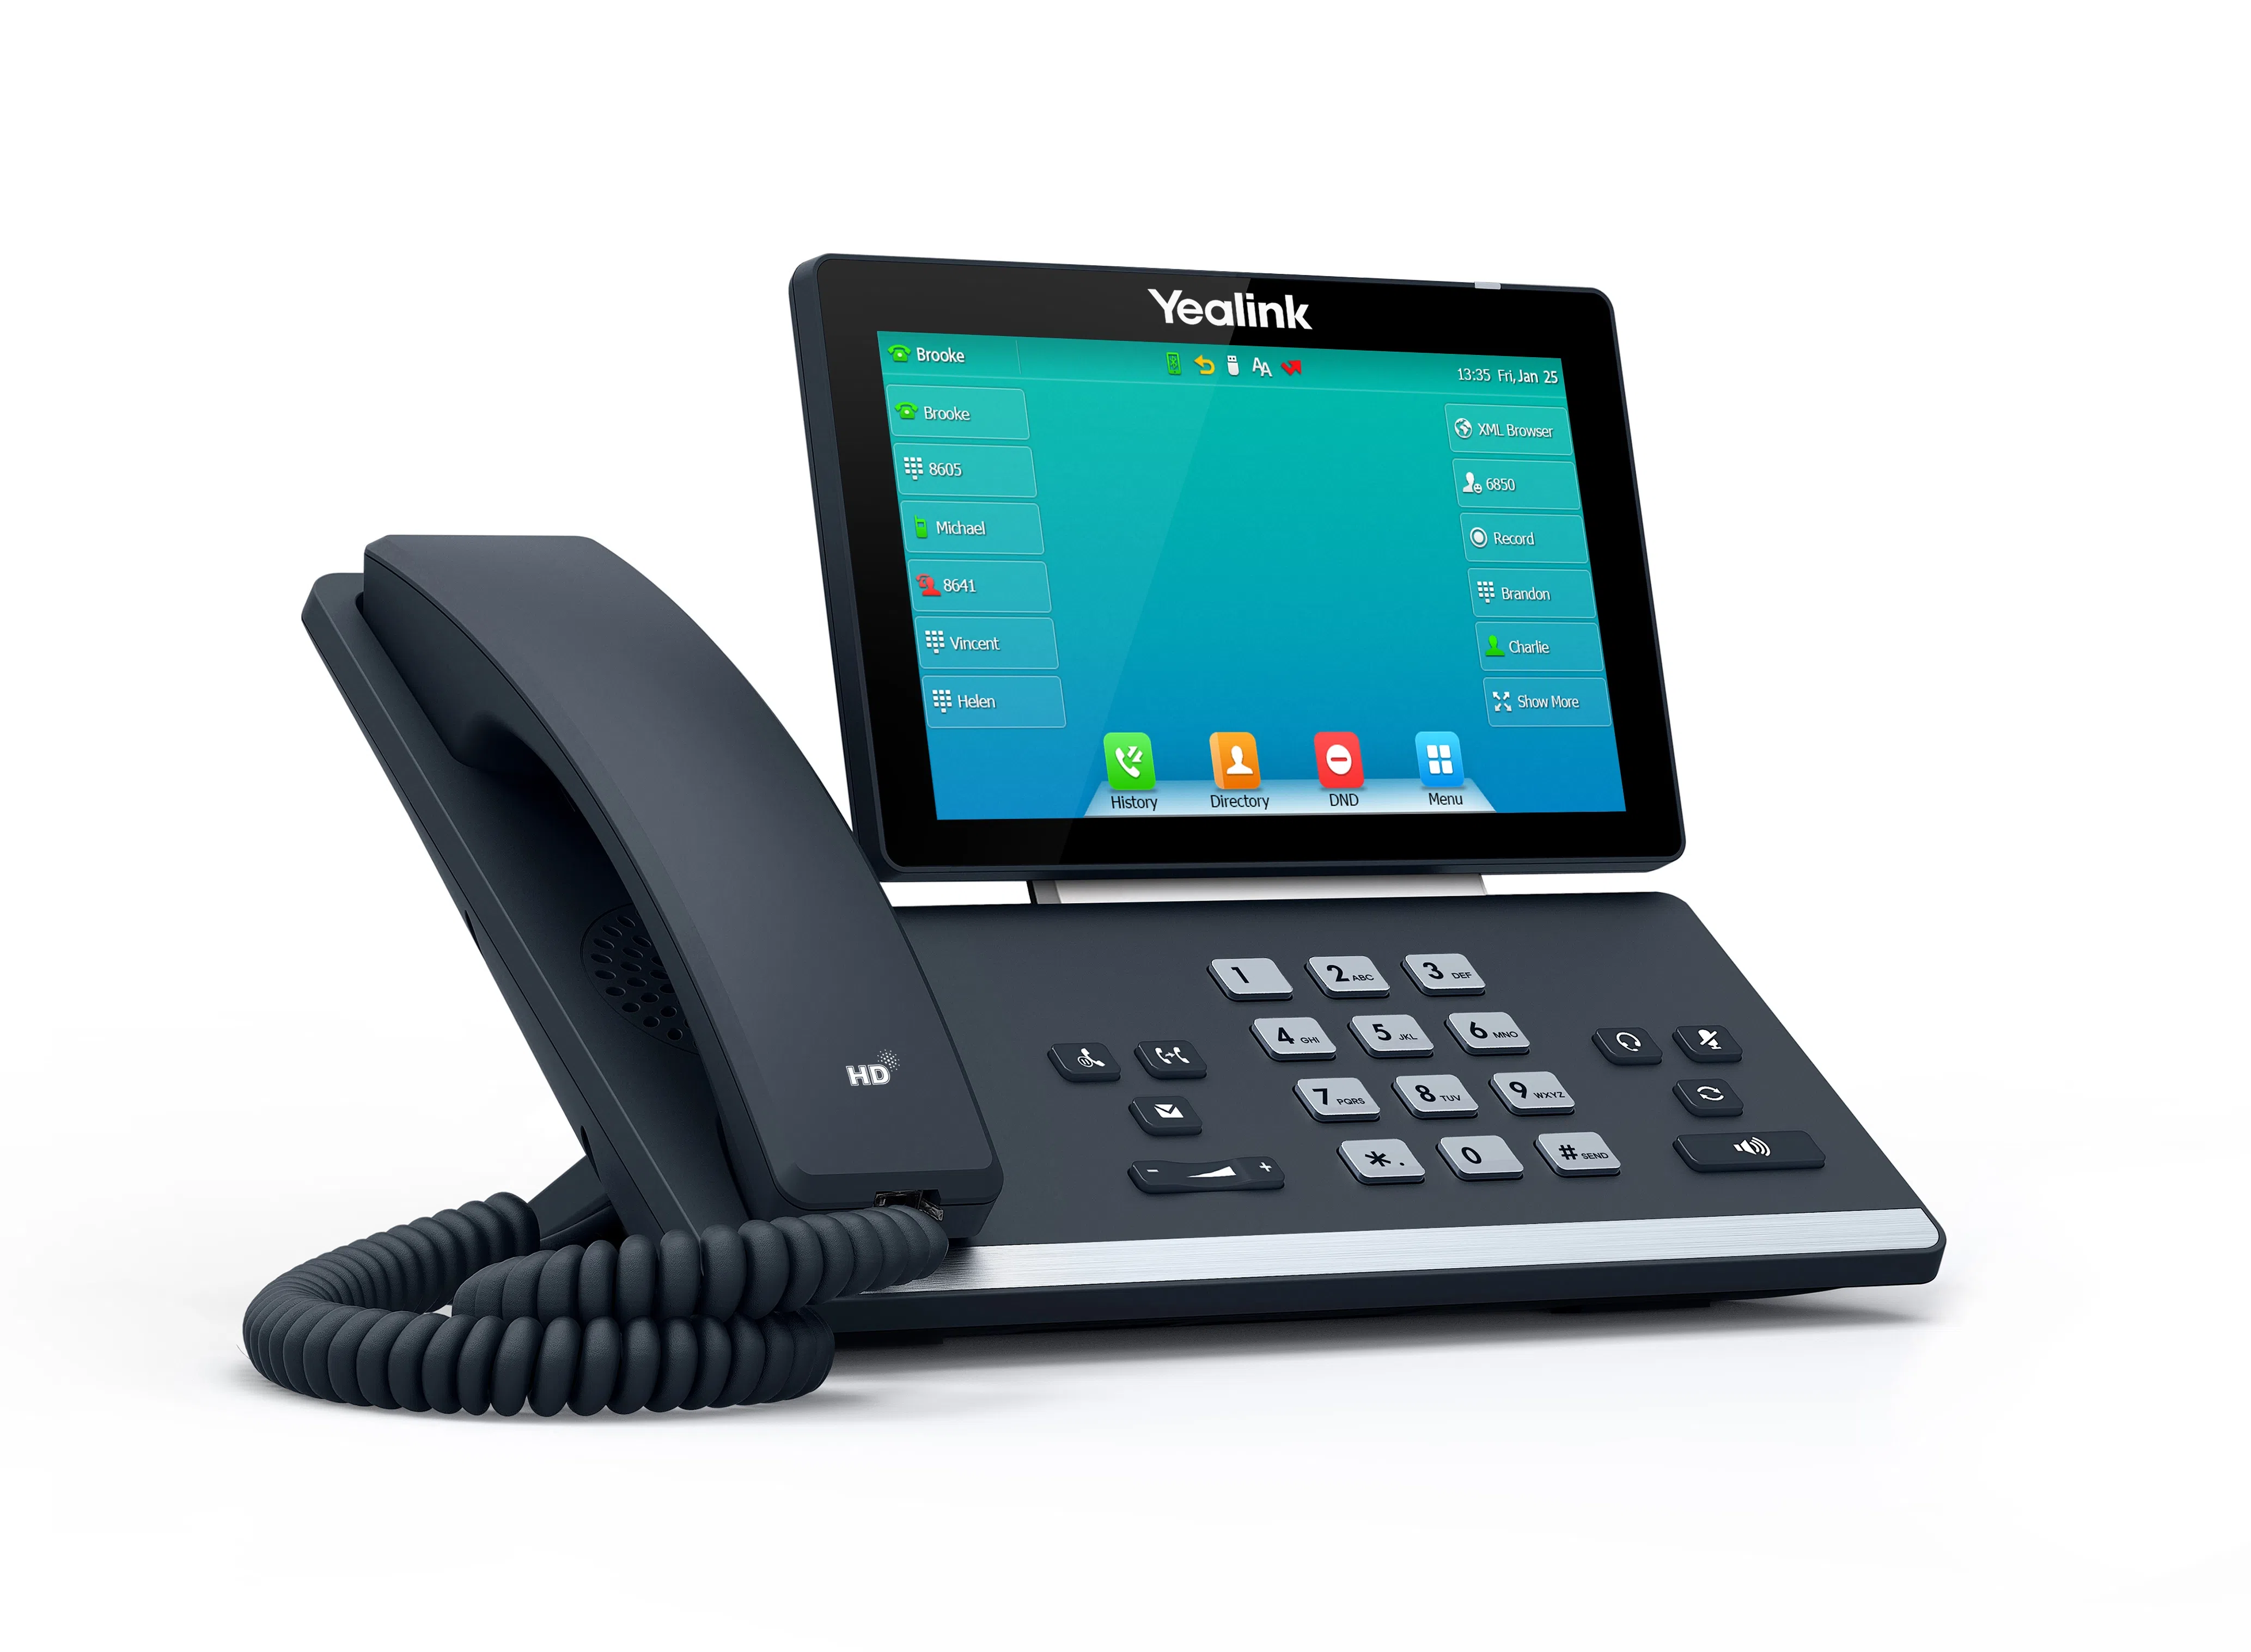 What display type is featured on the Yealink T57W Premium IP Phone?